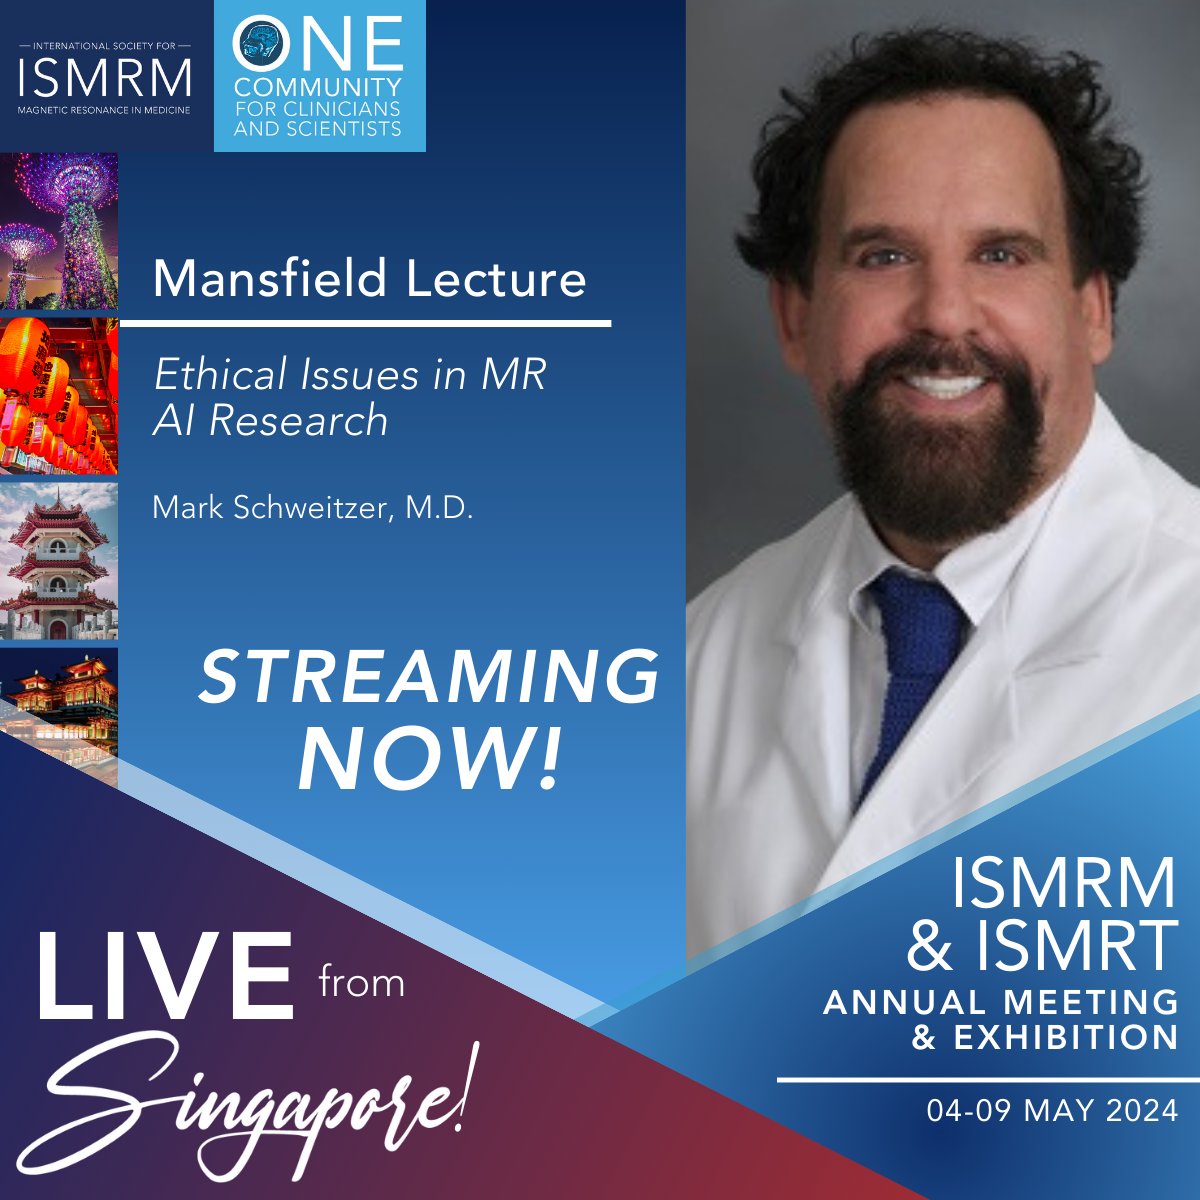 Watch LIVE from SINGAPORE: Don't miss the Closing Session followed by the Mansfield Lecture by Mark Schweitzer, M.D. streaming NOW! ow.ly/LR6i50Rz7vq #ISMRM2024 #ISMRT2024 #ISMRM #ISMRT #MRI #MR #MagneticResonance #Singapore